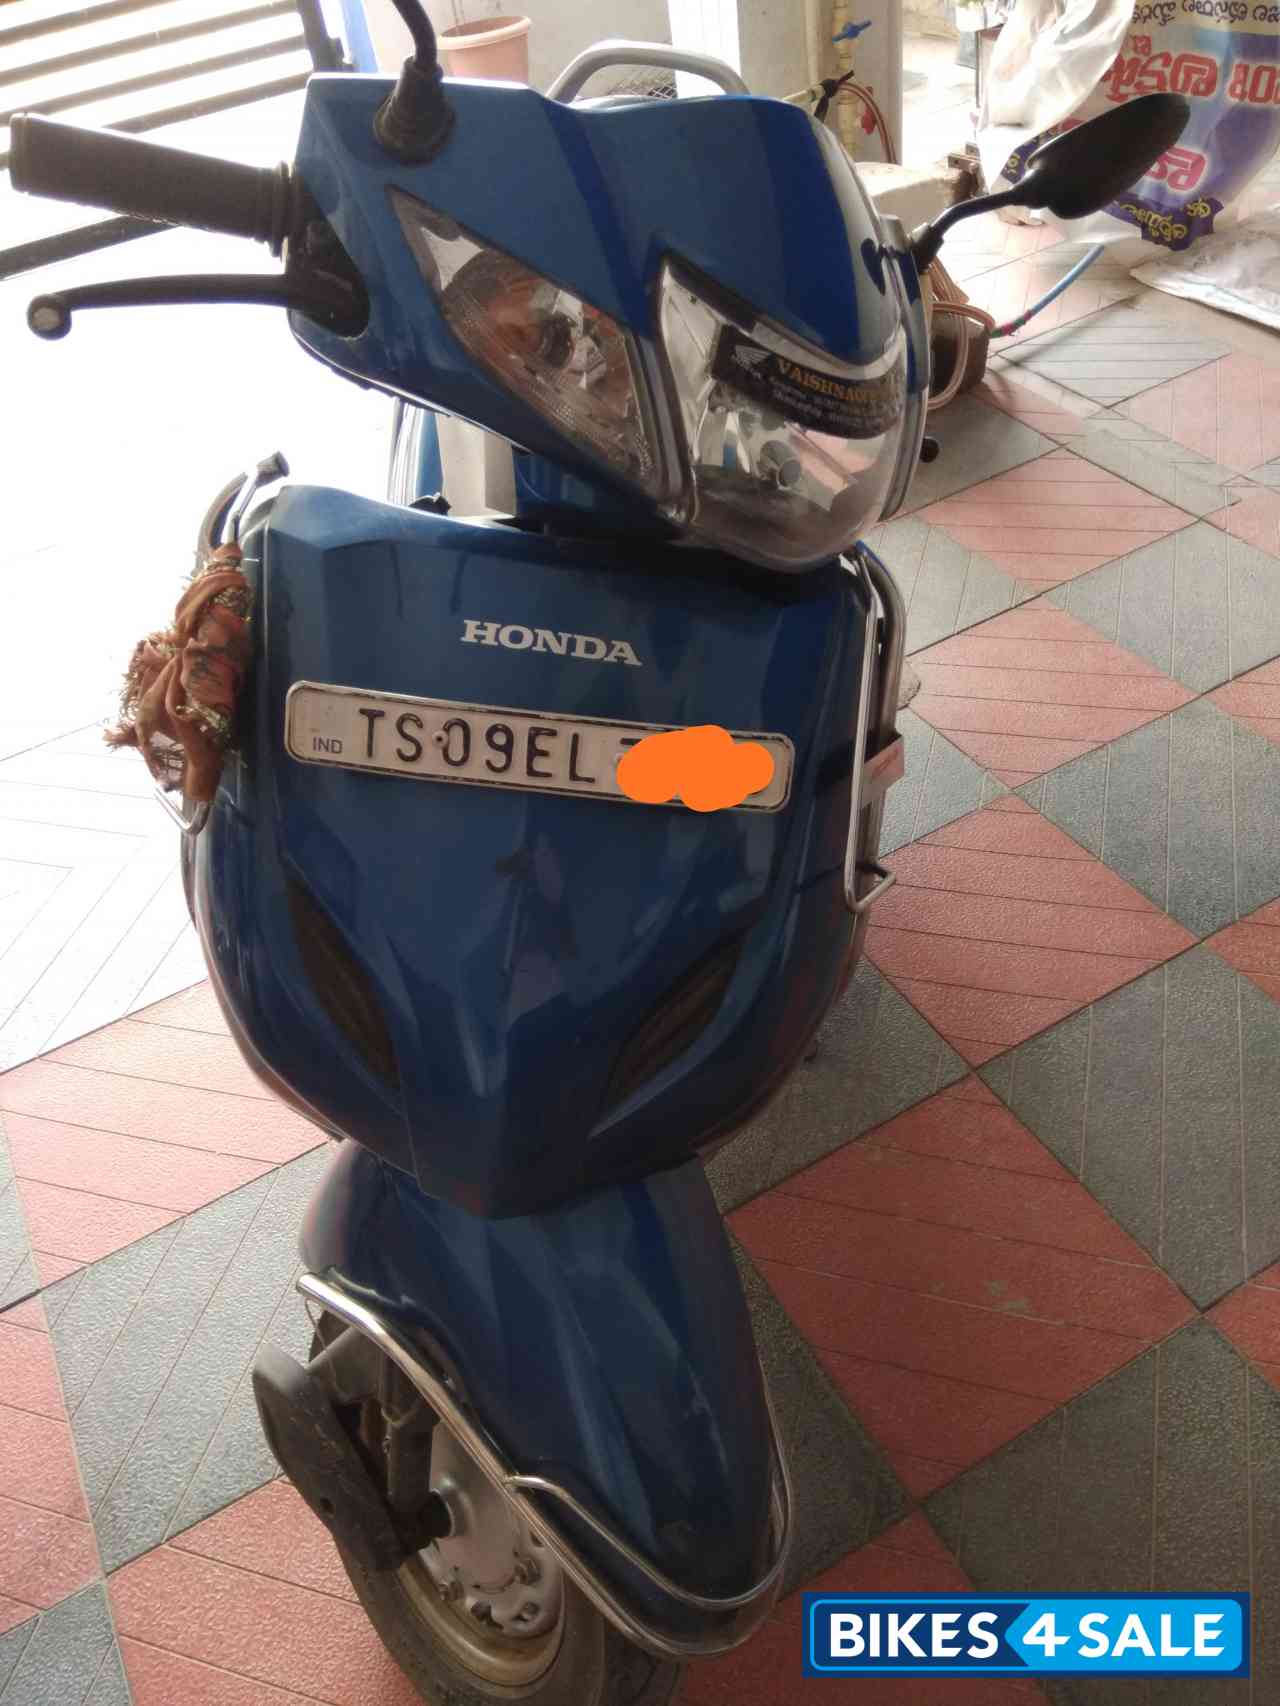 Used 2016 model Honda Activa 3G for sale in Hyderabad. ID 208881 